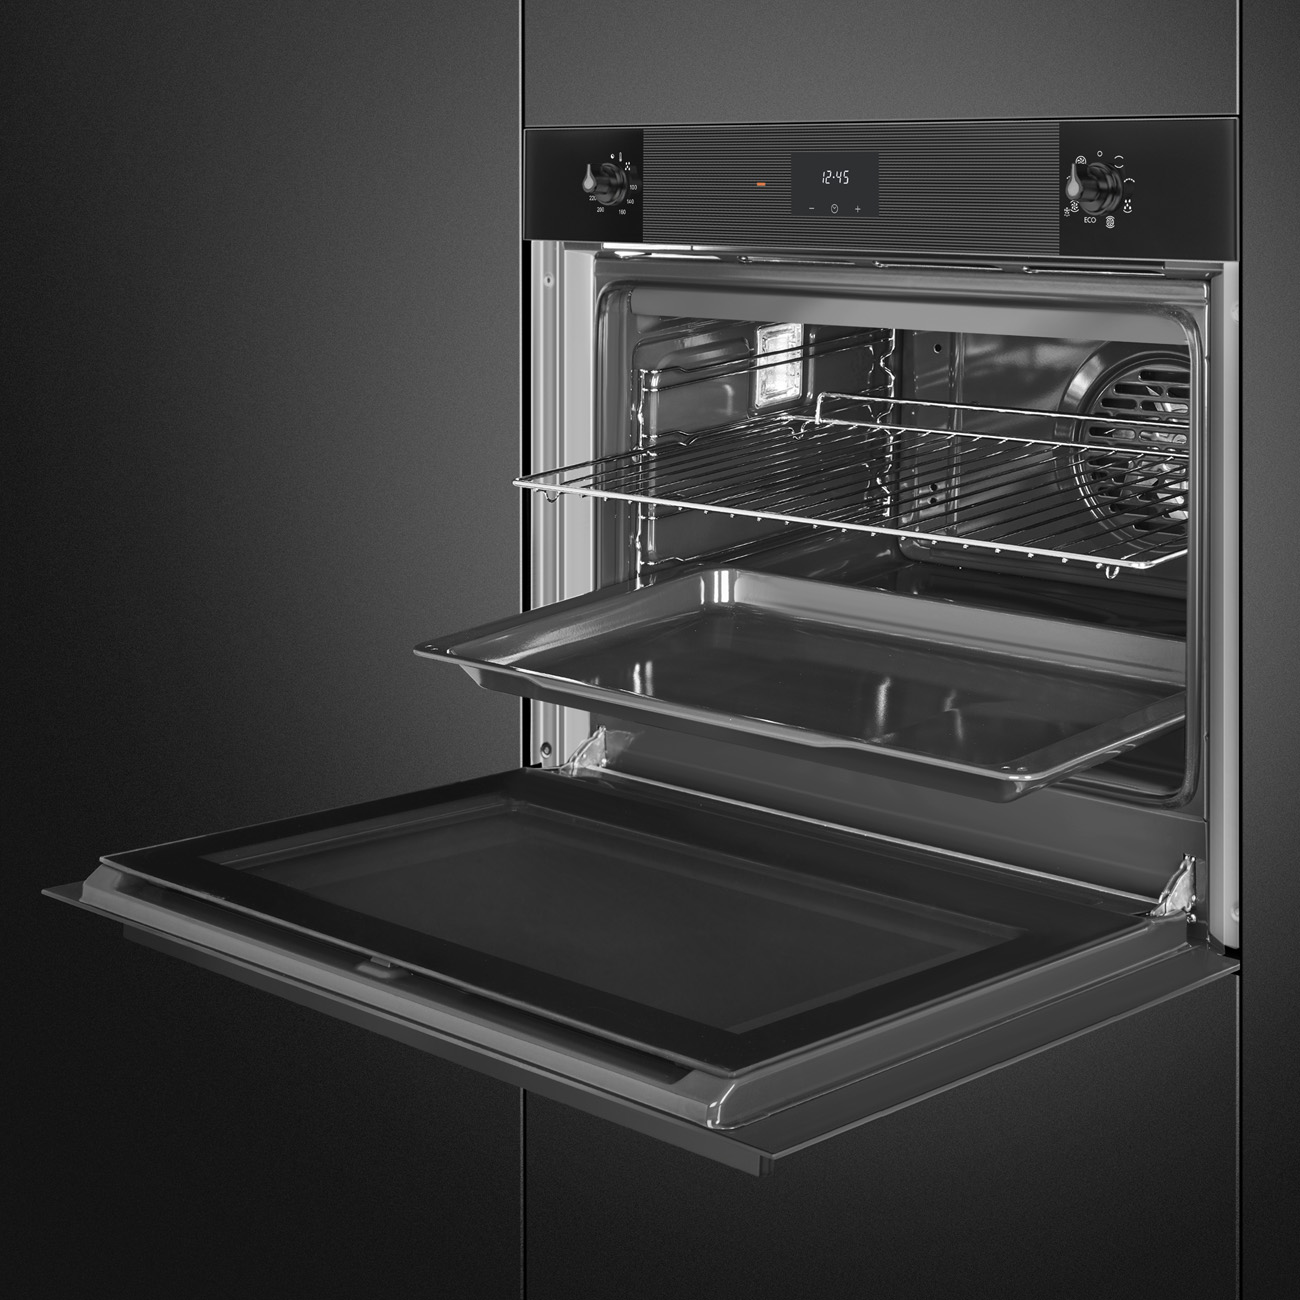 Oven Thermo-ventilated 75 cm Smeg_5